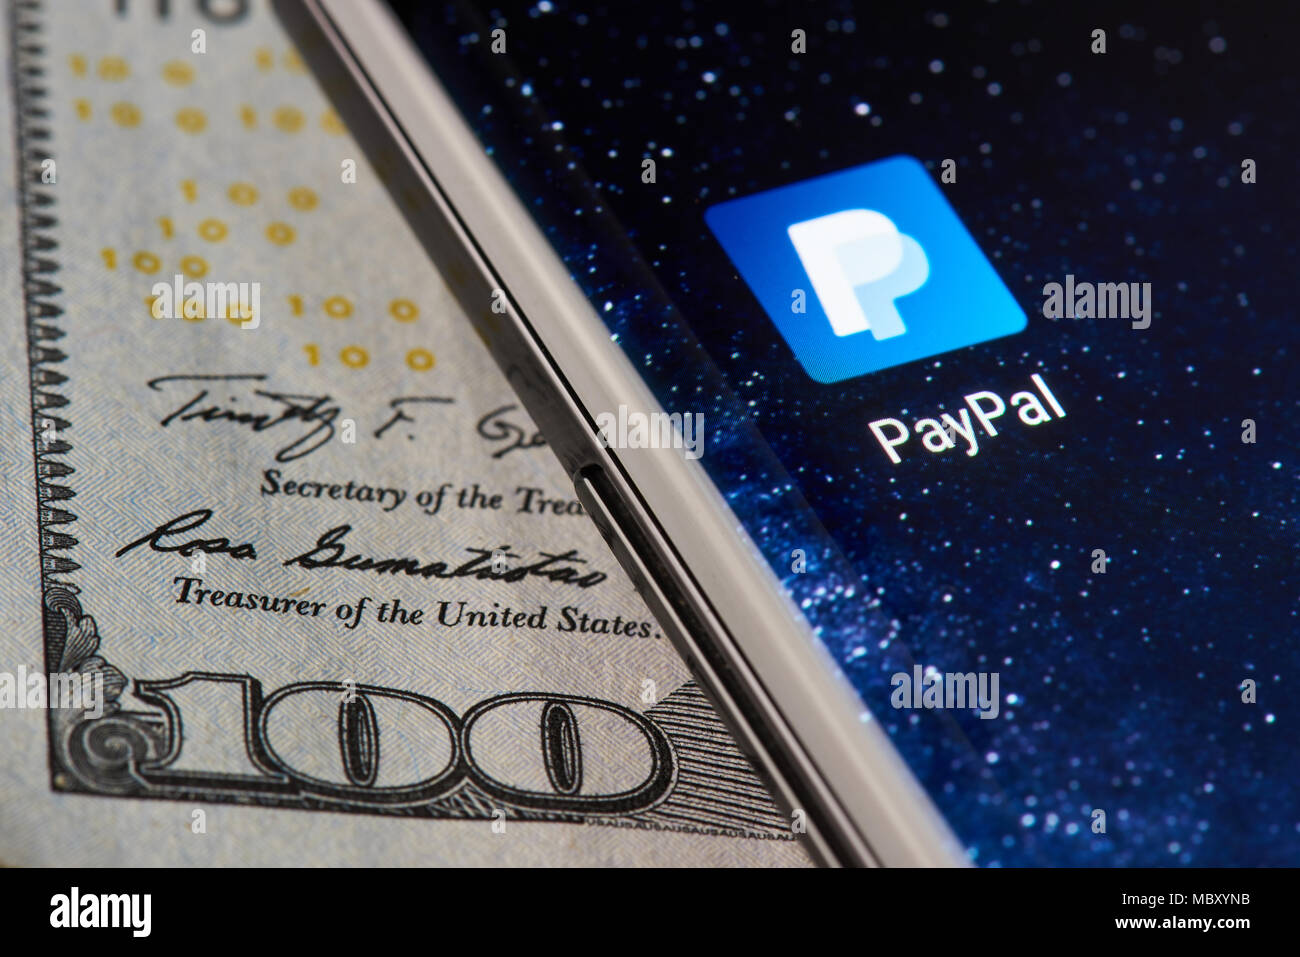 New york, USA - April 11, 2018: Paypal icon app on smartphone close-up on dollar currency background Stock Photo